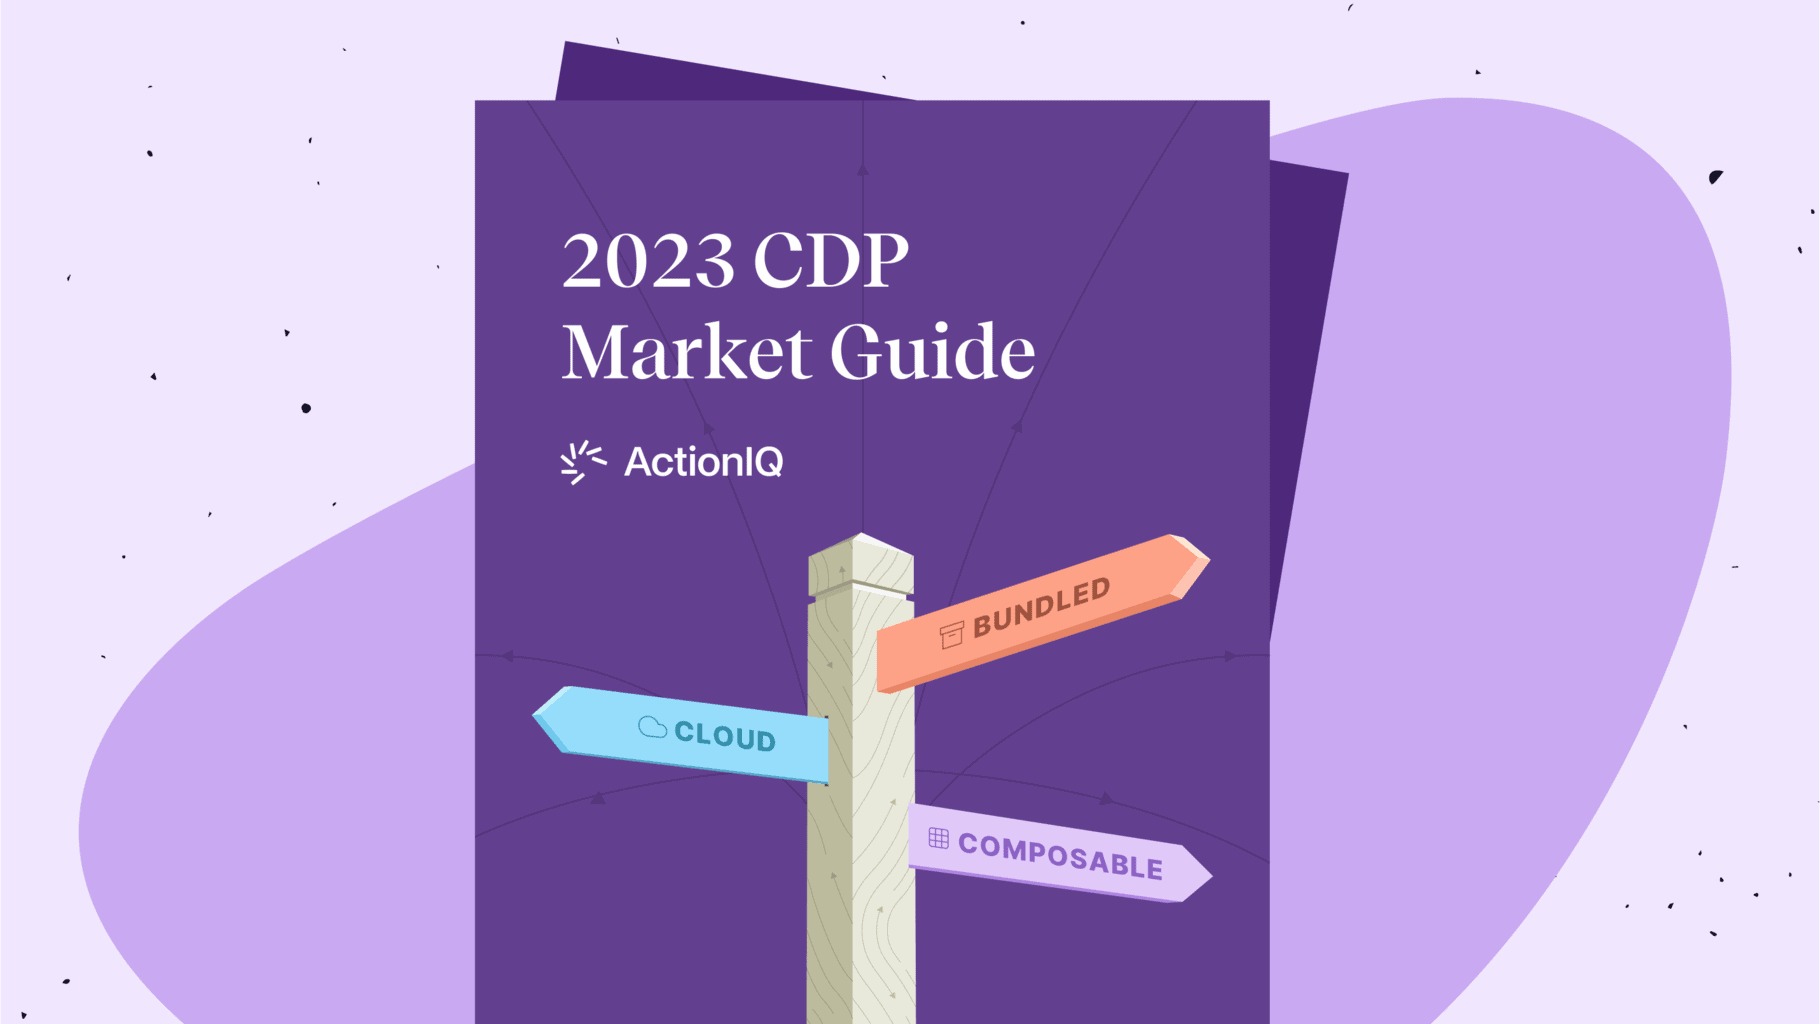 2023 CDP Market Guide from ActionIQ